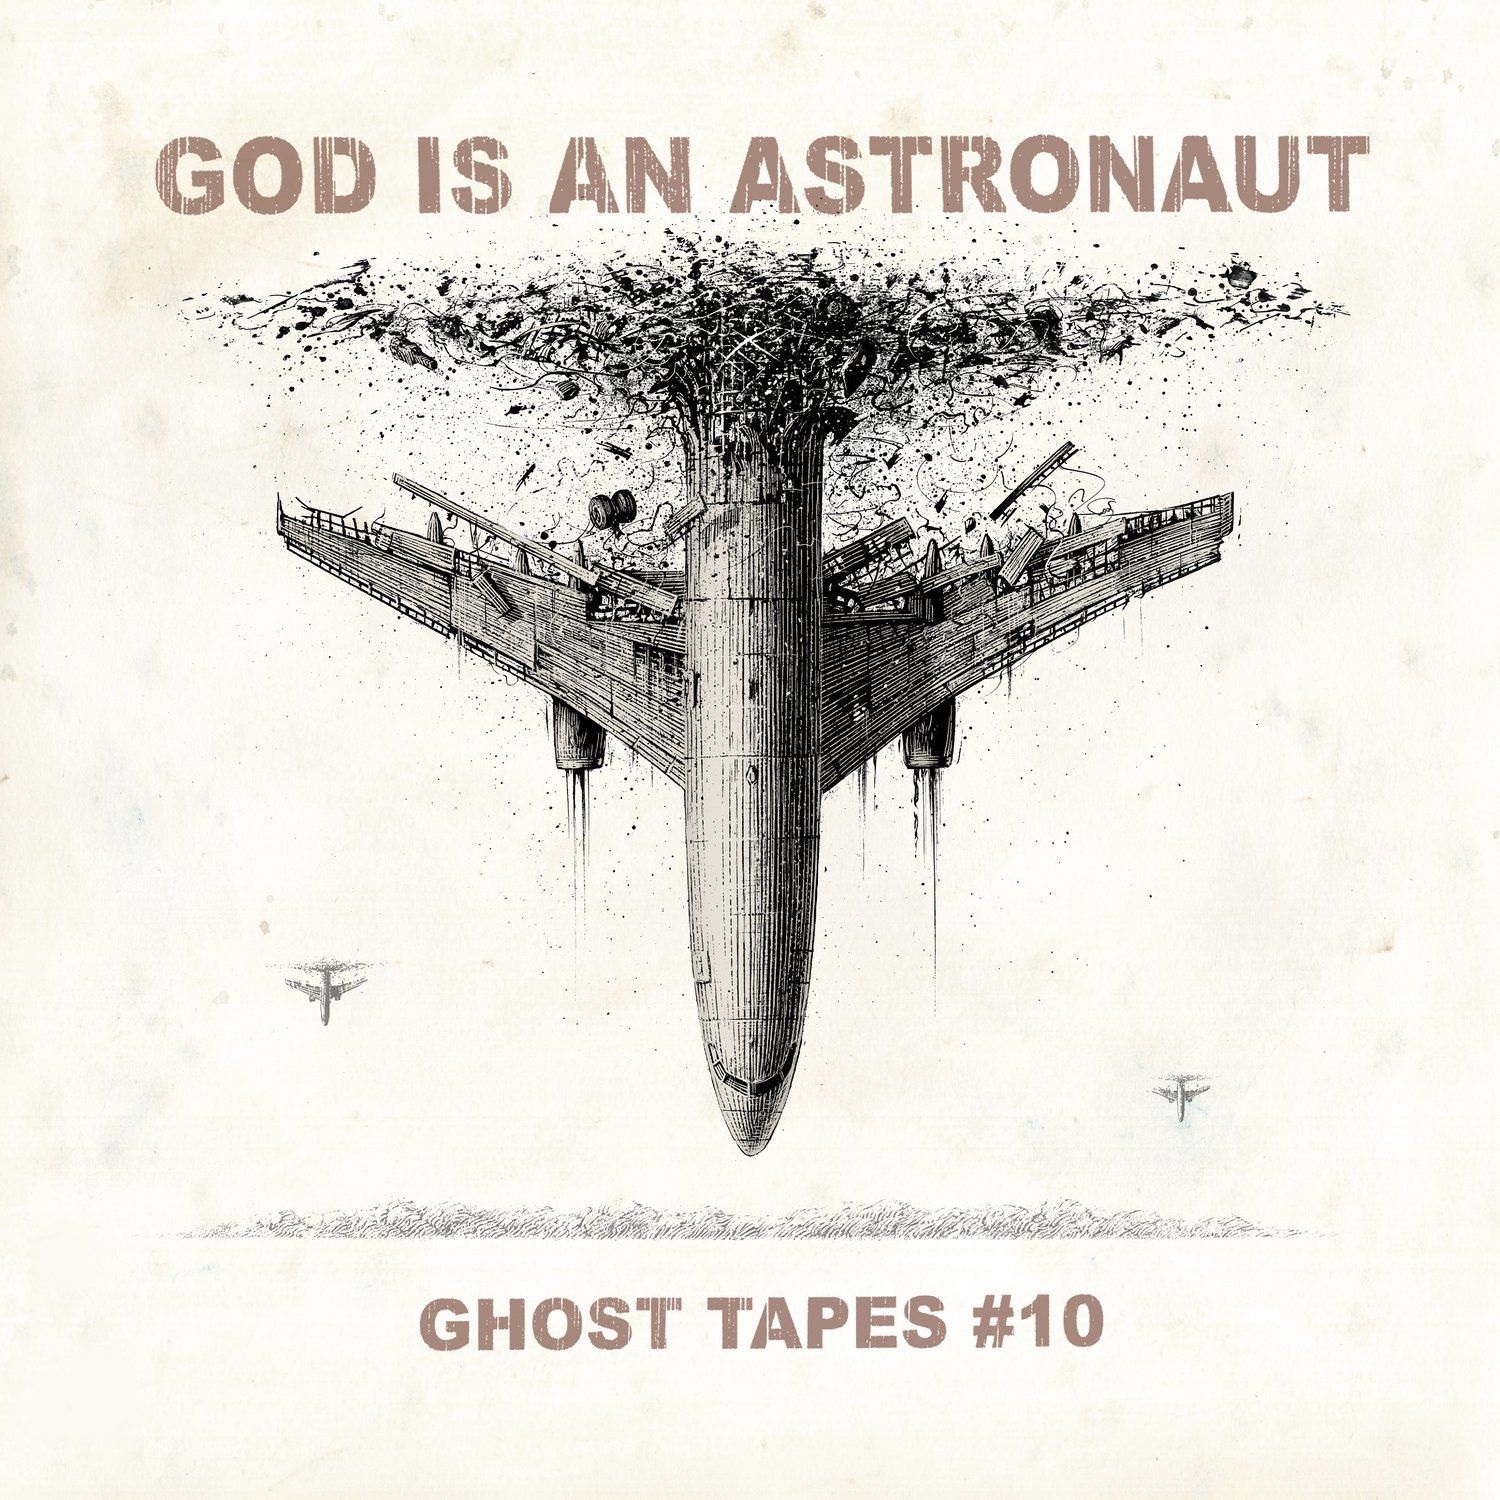 God Is an Astronaut - Ghost Tapes #10 (2021) [FLAC 24bit/96kHz]